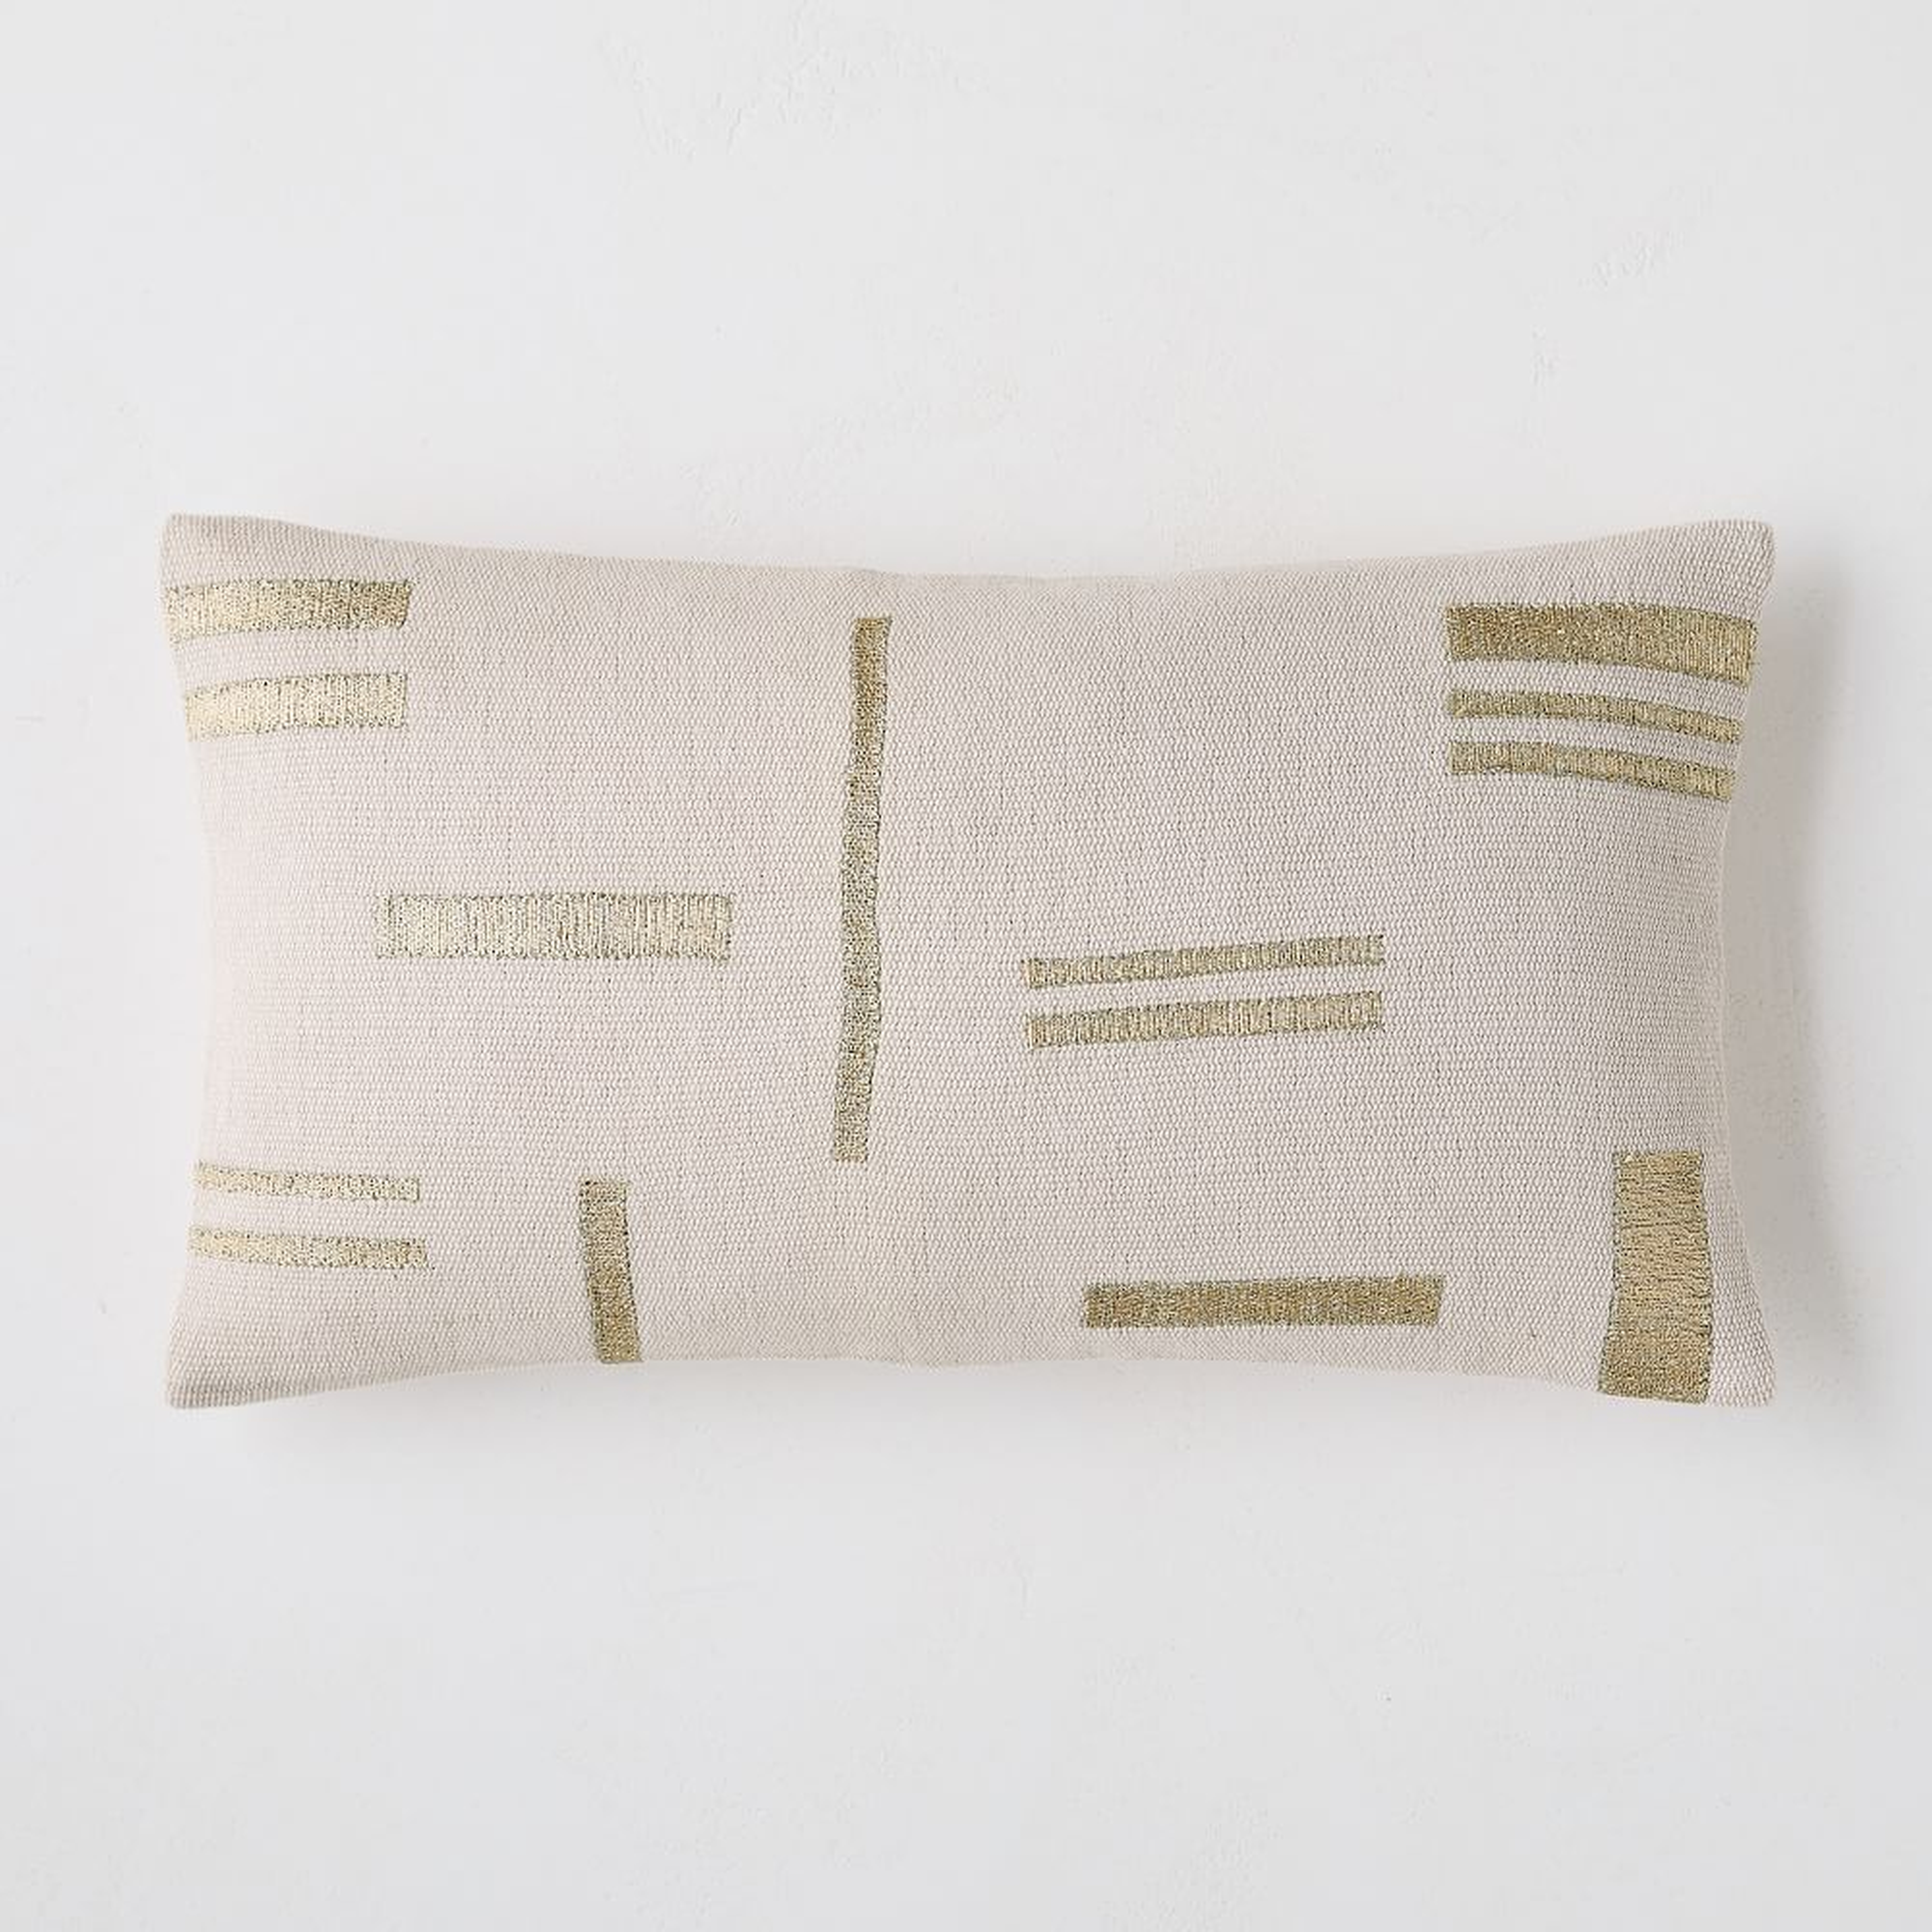 Embroidered Metallic Blocks Pillow Cover, 12"x21", Natural, Set of 2 - West Elm